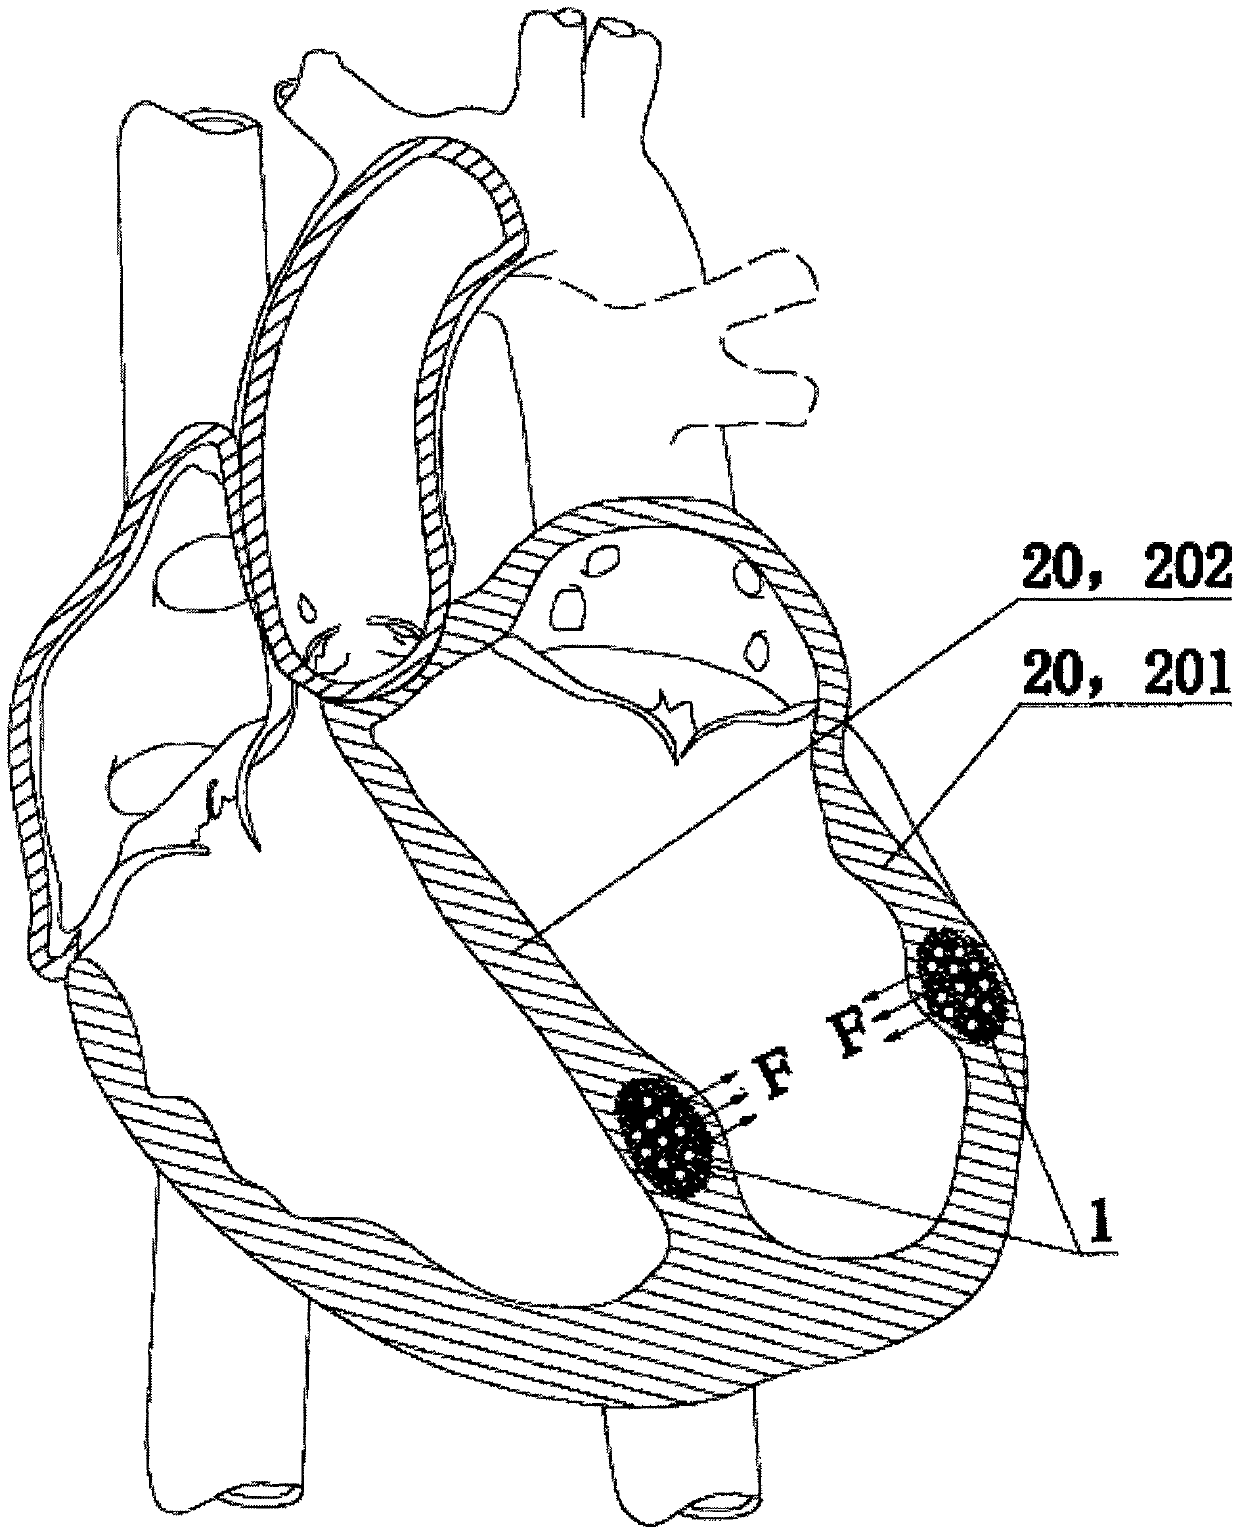 Ventricle assisting device capable of enhancing cardiac functions